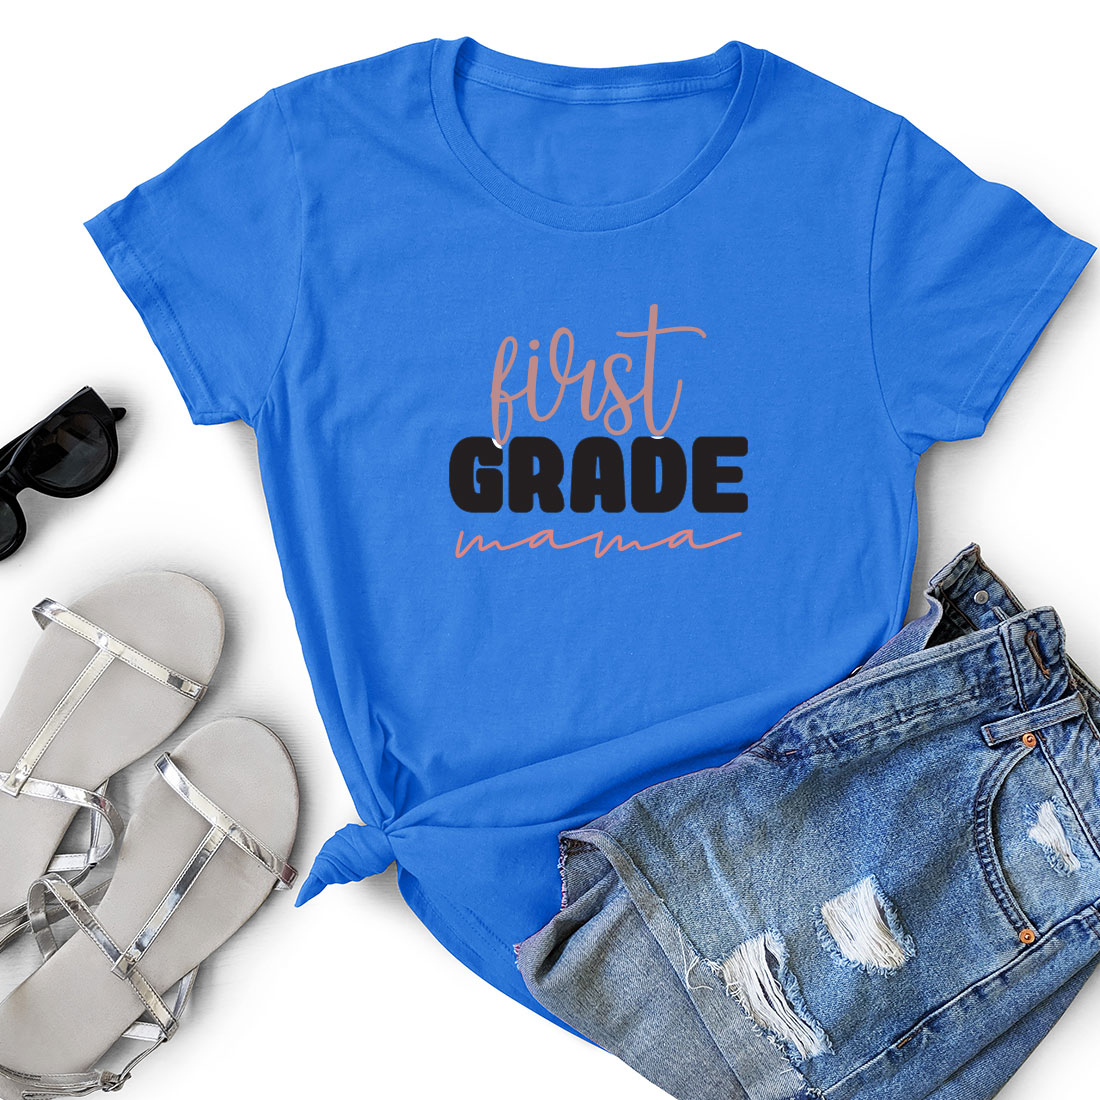 Blue shirt that says first grade next to a pair of shorts.